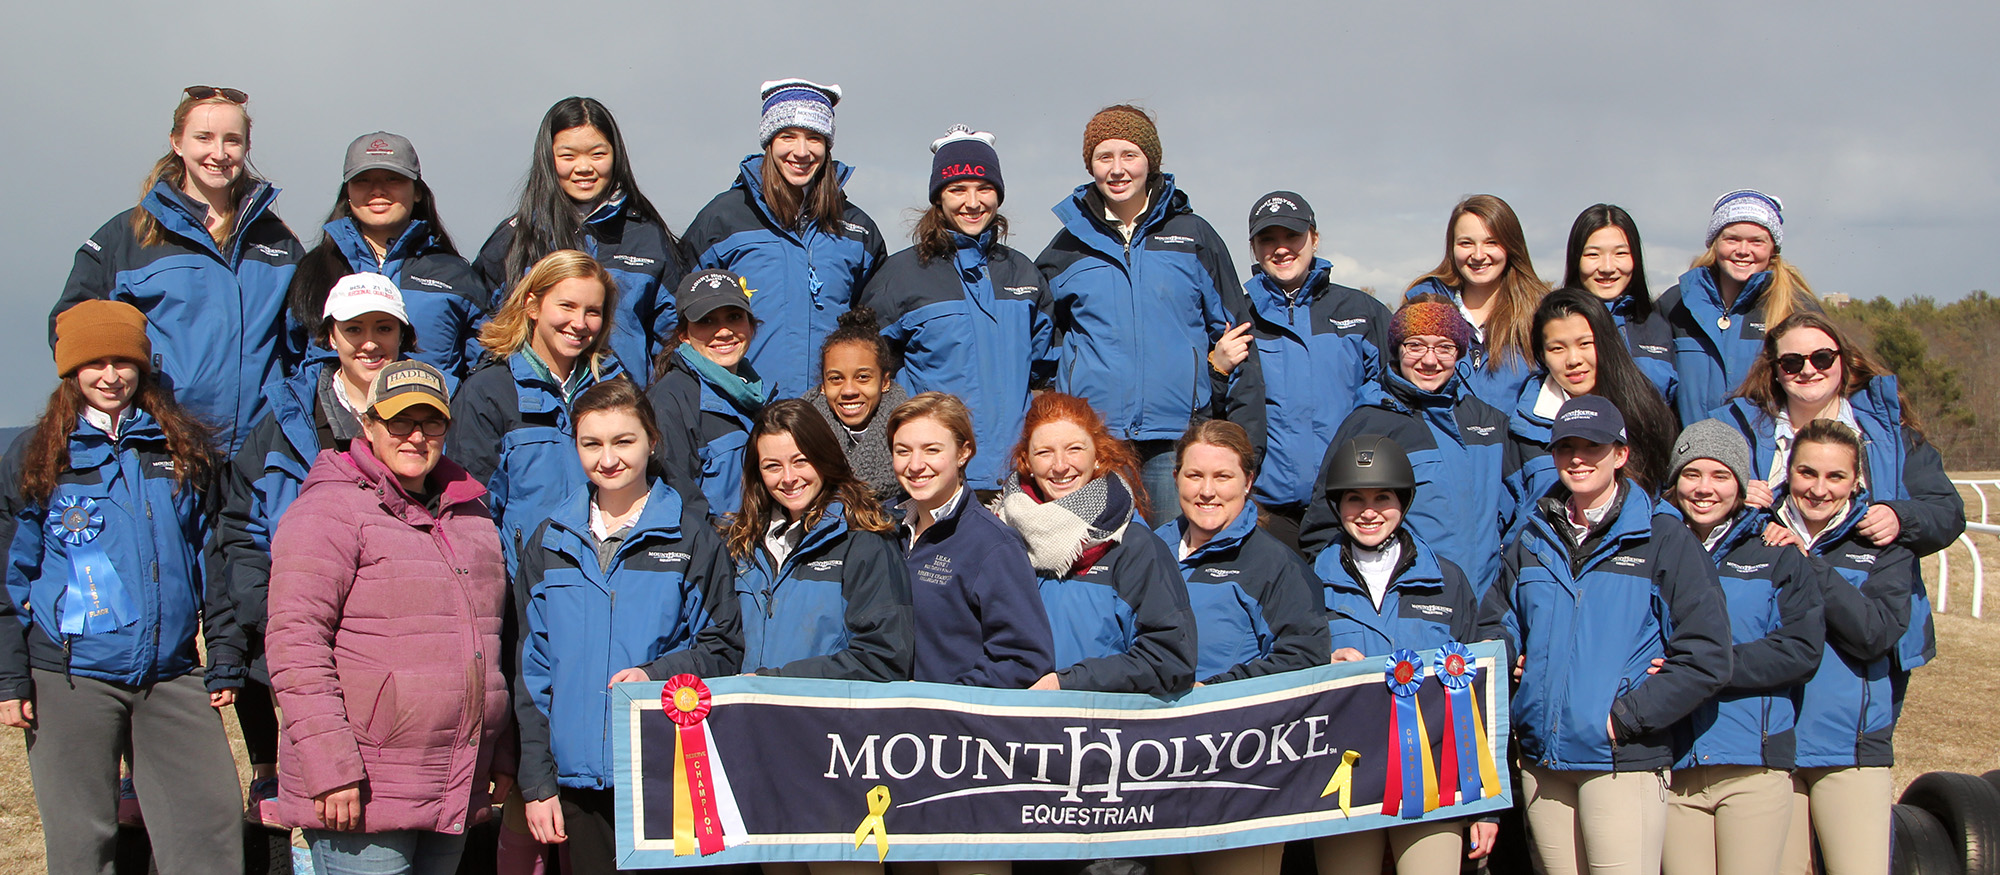 Photo of the Lyons riding team after winning the 2018 Hampshire College Show on March 24, 2018.